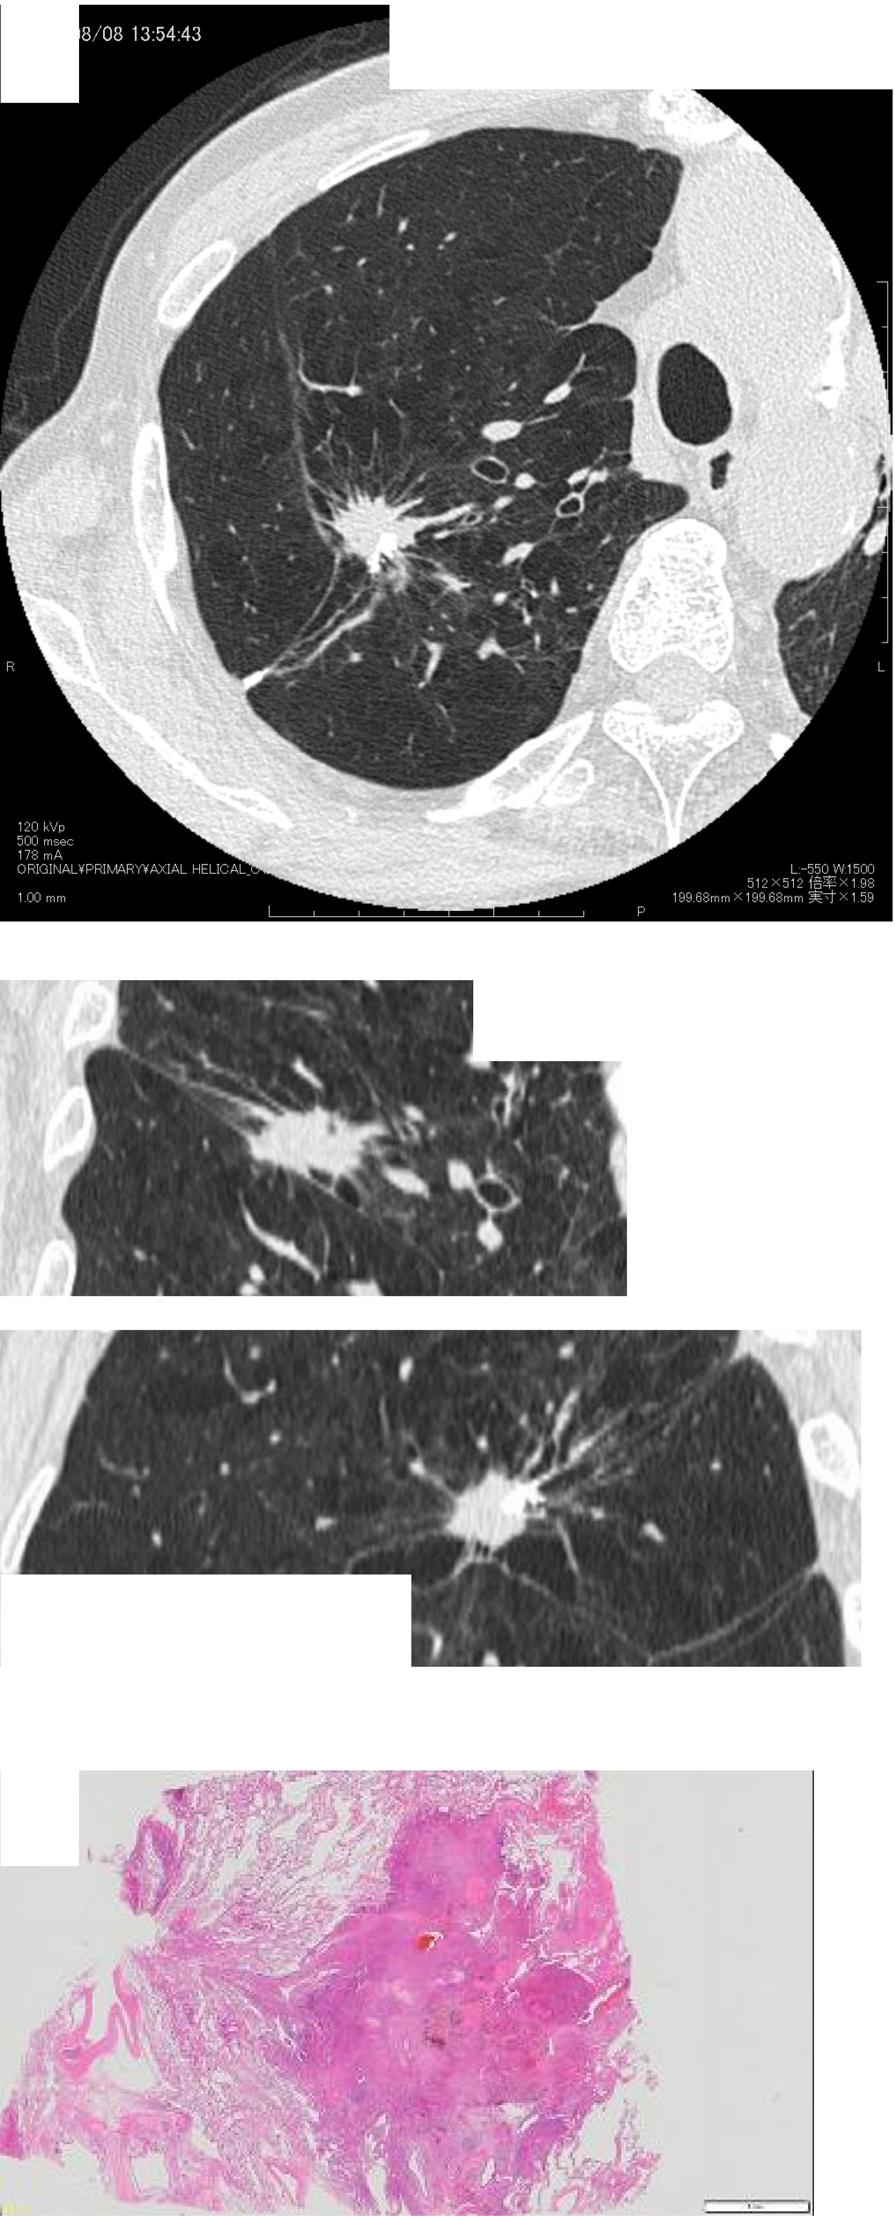 Hanaoka et al. Surgical Case Reports (2018) 4:2 Page 5 of 7 a b Fig. 5 a Radiographic estimation by multi-planar reconstructions (transverse, coronal, and sagittal views) on thin-slice CT images (0.